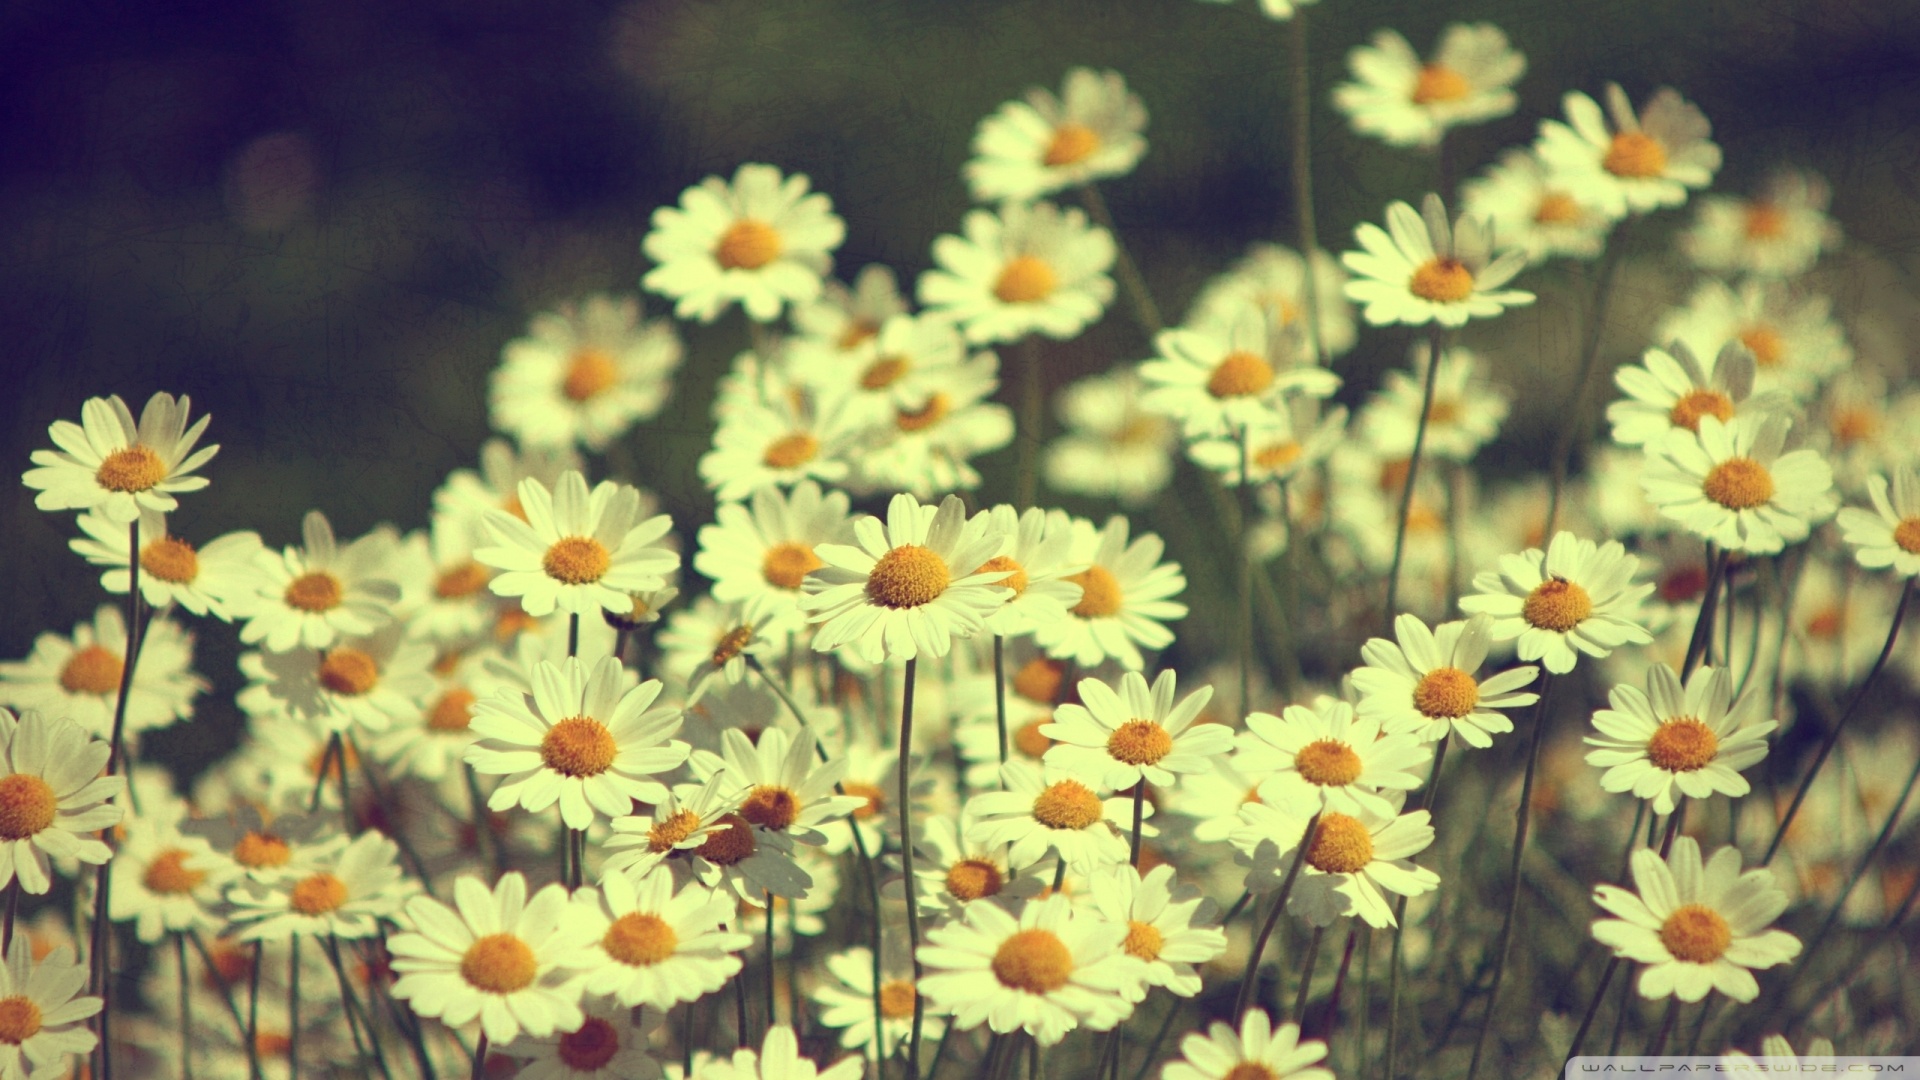 vintage wallpaper photography daisies images 1920x1080